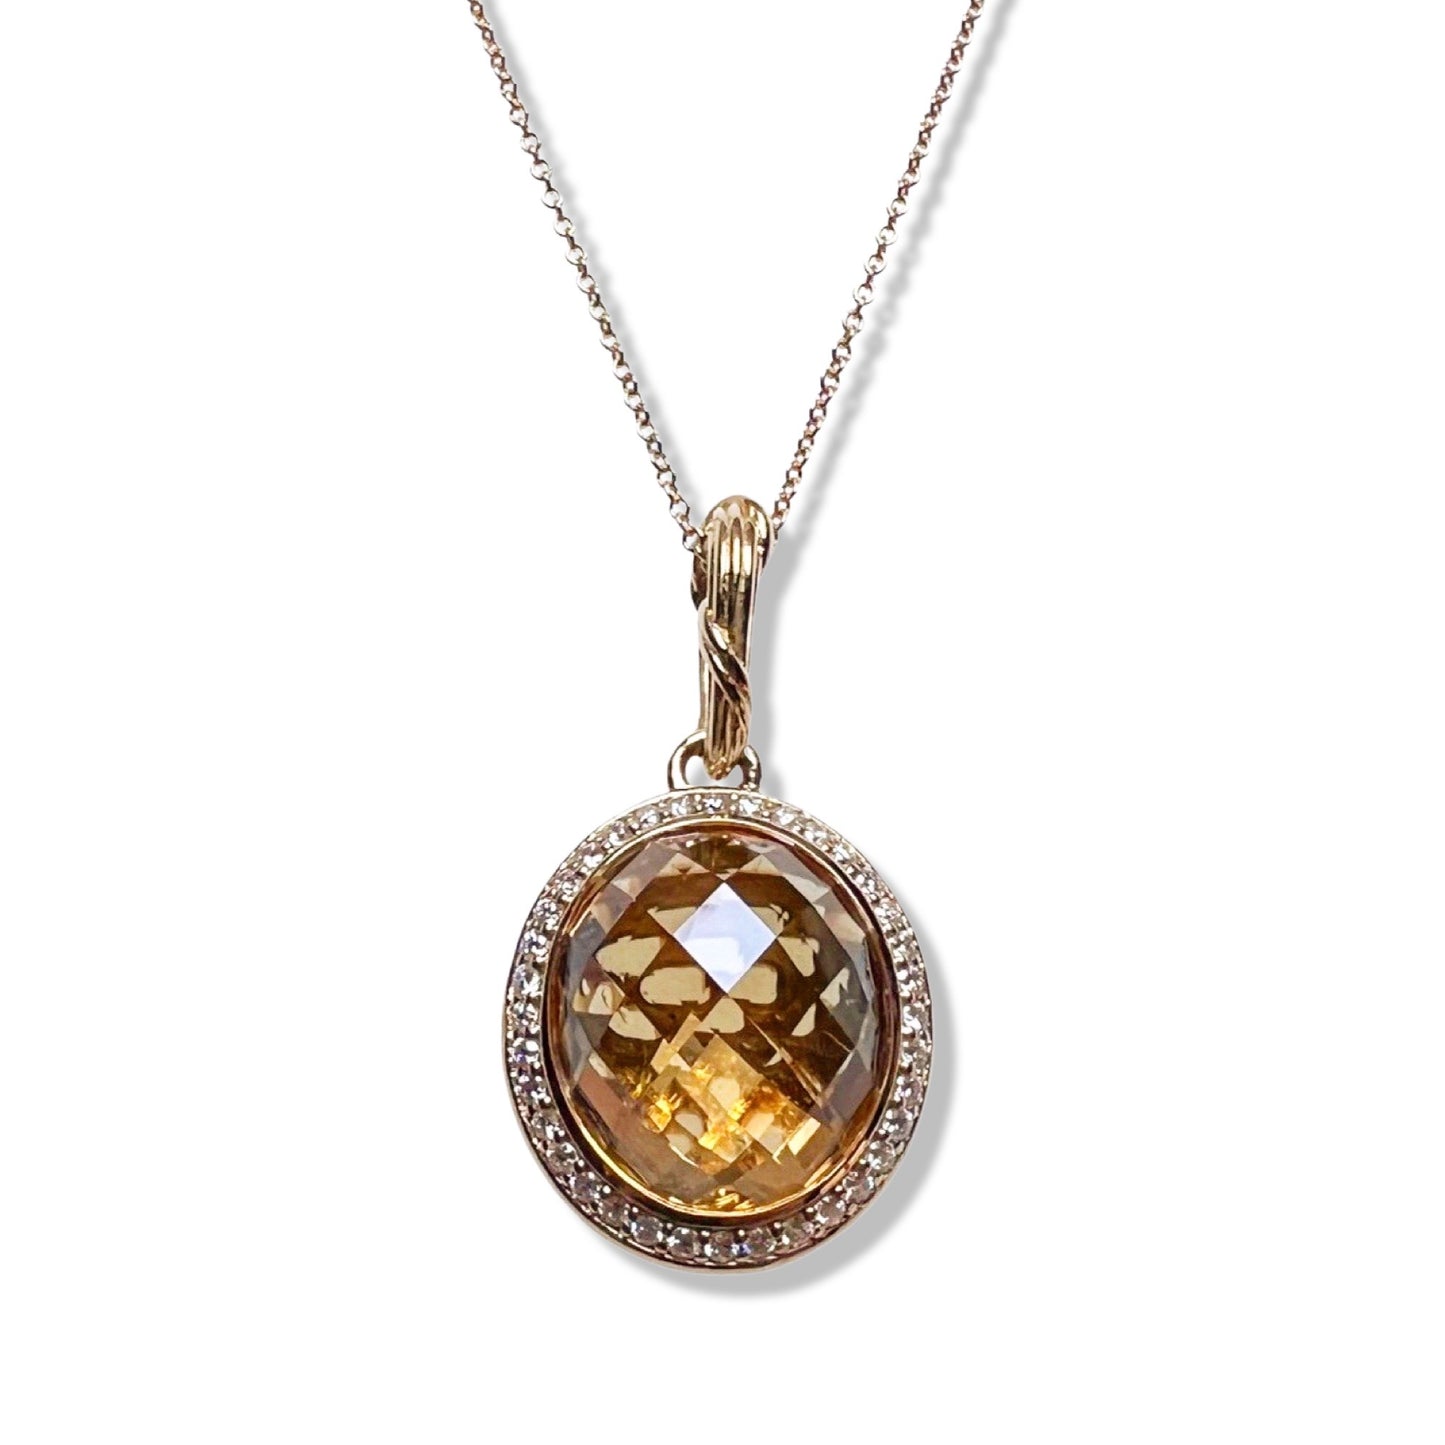 Fantasies Citrine Halo Pendant Necklace in 18k yellow gold with diamonds